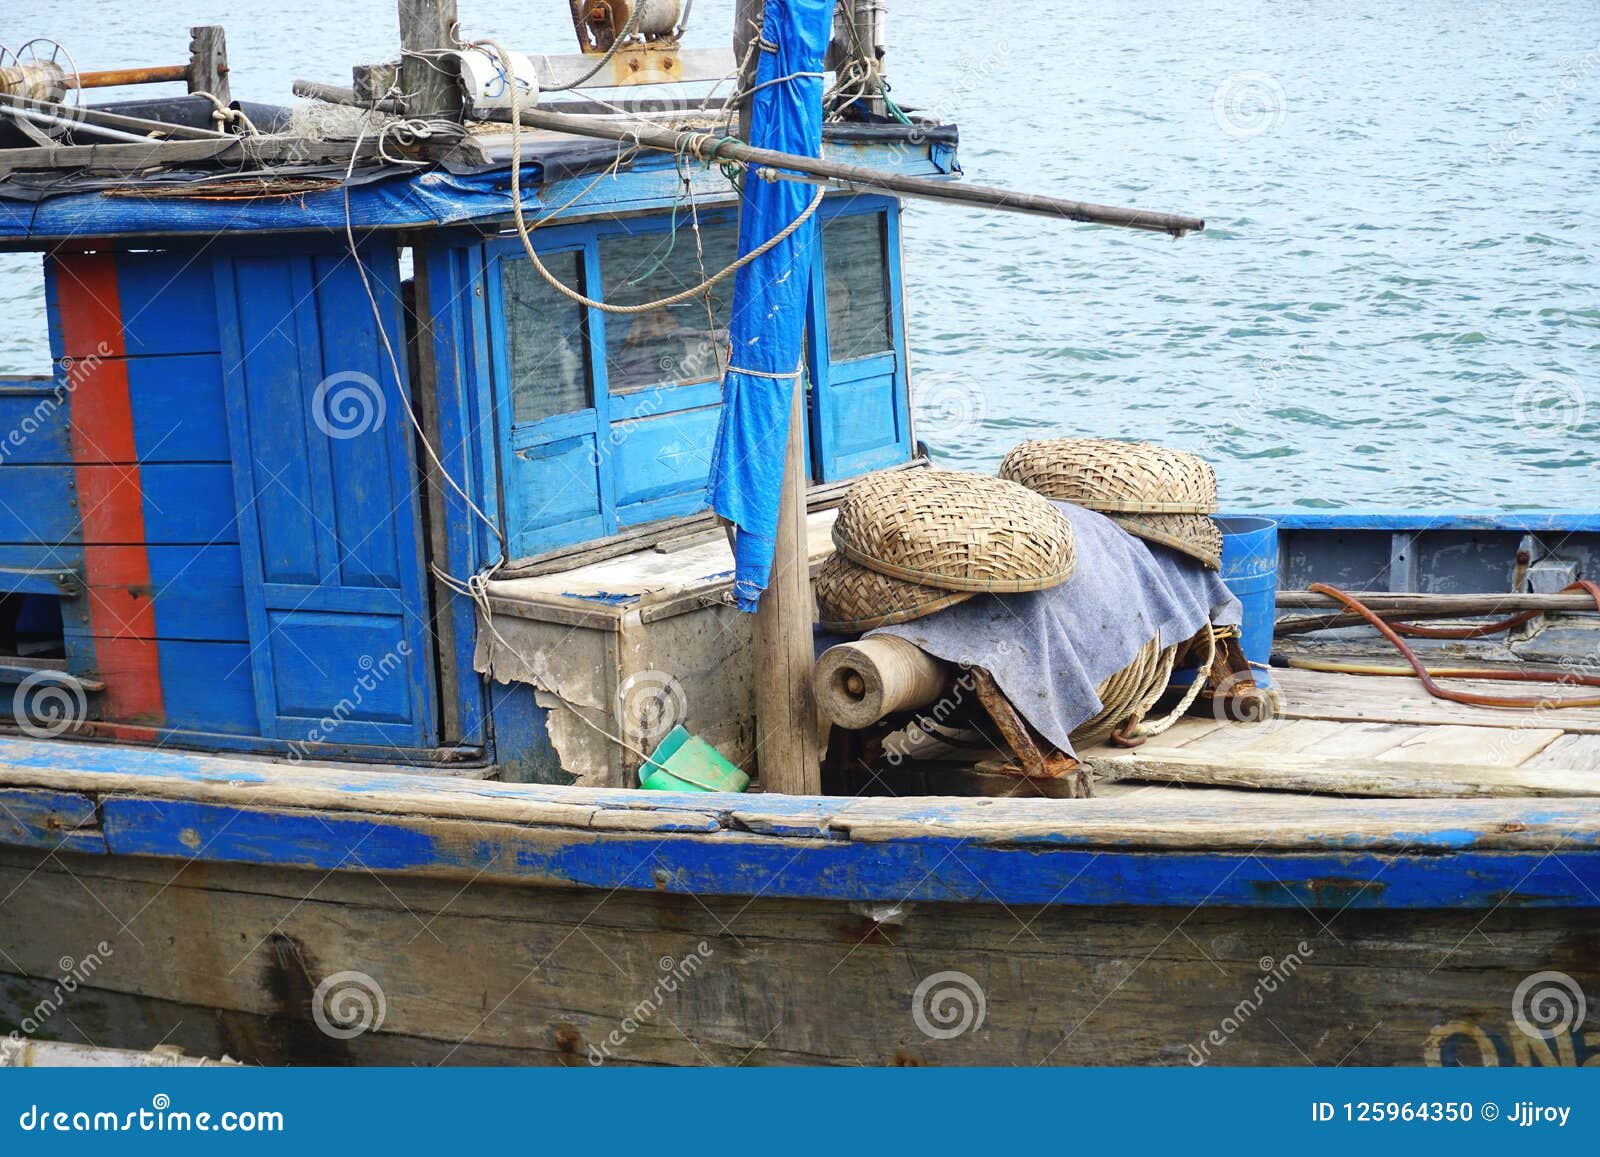 https://thumbs.dreamstime.com/z/closeup-vintage-painted-wooden-fishing-boat-river-near-hoi-vietnam-weathered-blue-fishing-boat-tied-up-along-125964350.jpg